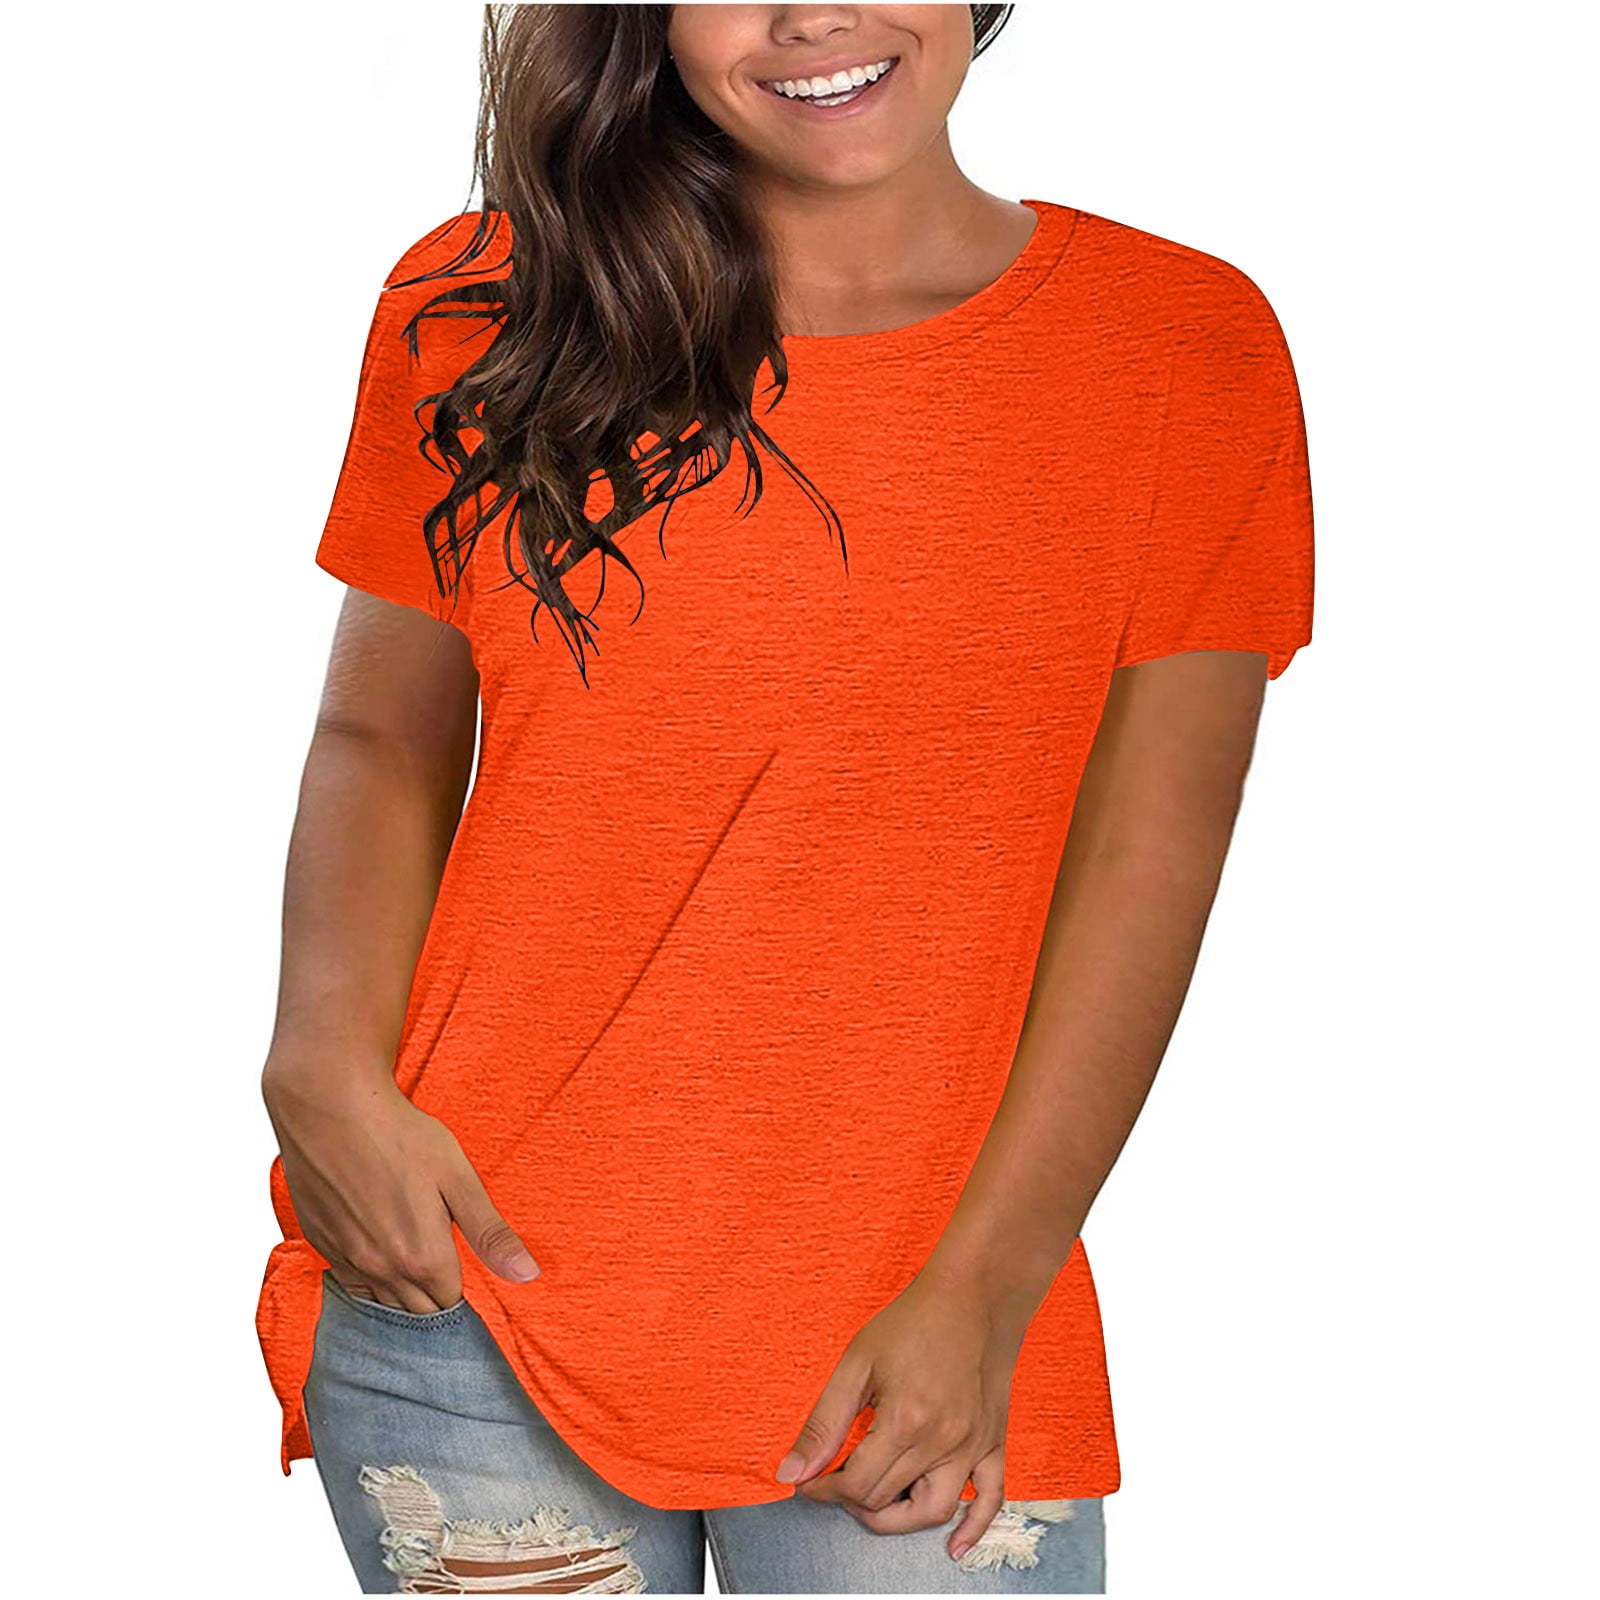 T-Shirts Clearance,Women Patlollav Sleeve O-Neck Plus-Size Solid Tops Womens Short Loose